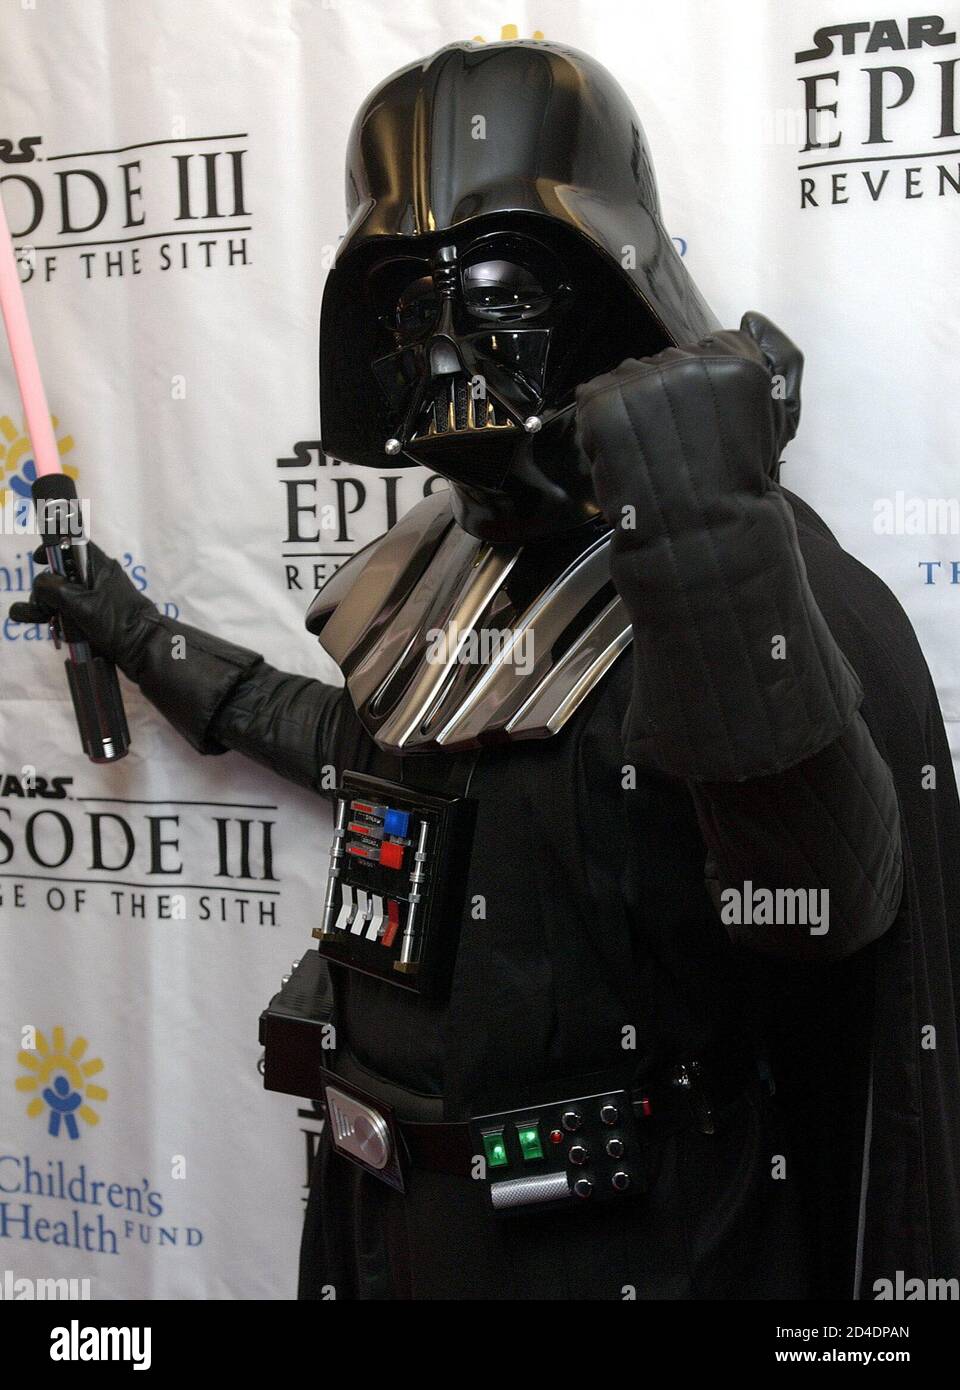 A fan dressed as Darth Vader poses at the premiere of Star Wars Episode III, Revenge of the Sith in New York, May 12, 2005.  The movie opens nationwide May 19. Stock Photo